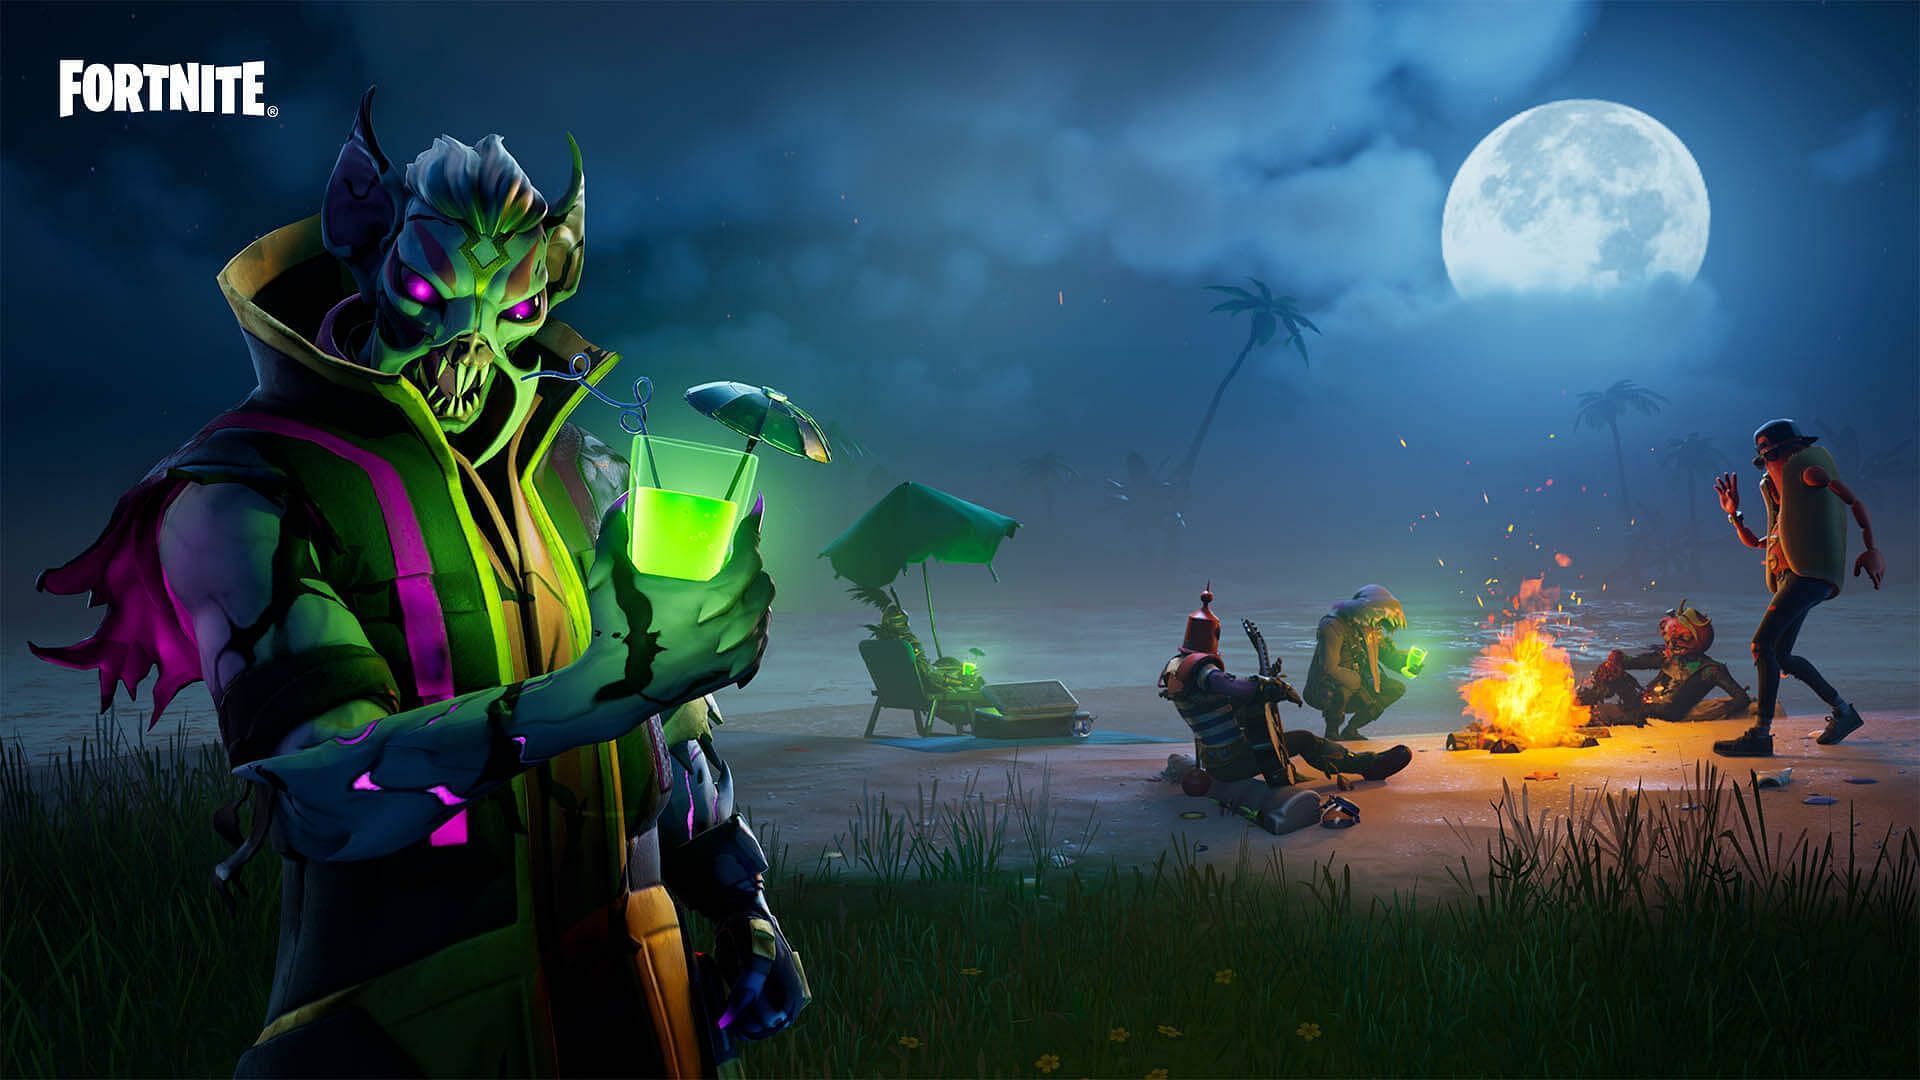 The upcoming Fortnite Halloween event will add a lot of new content to the game (Image via Epic Games)